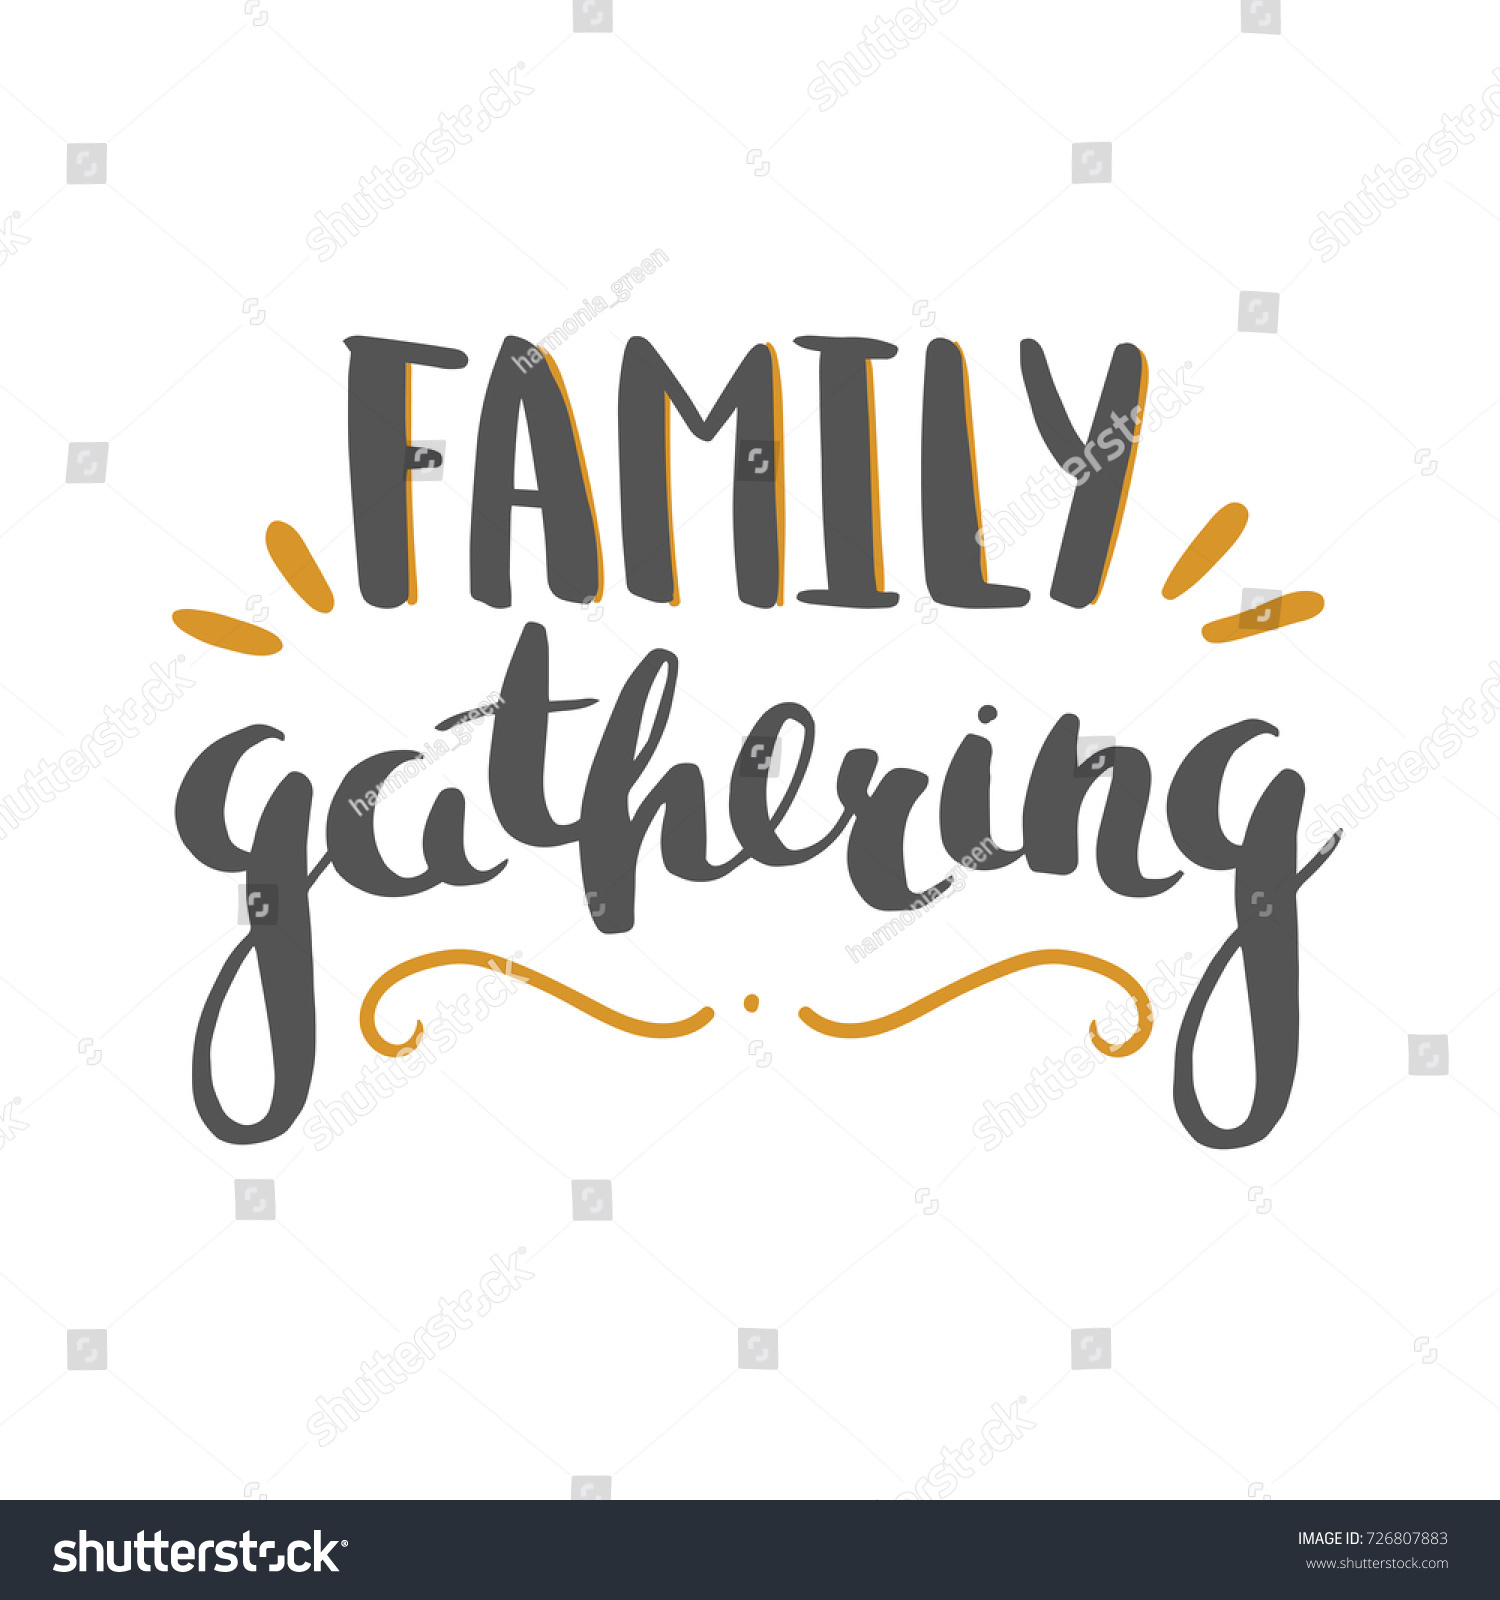  Family  Gathering  Hand Drawn Vector Lettering Stock Vector 